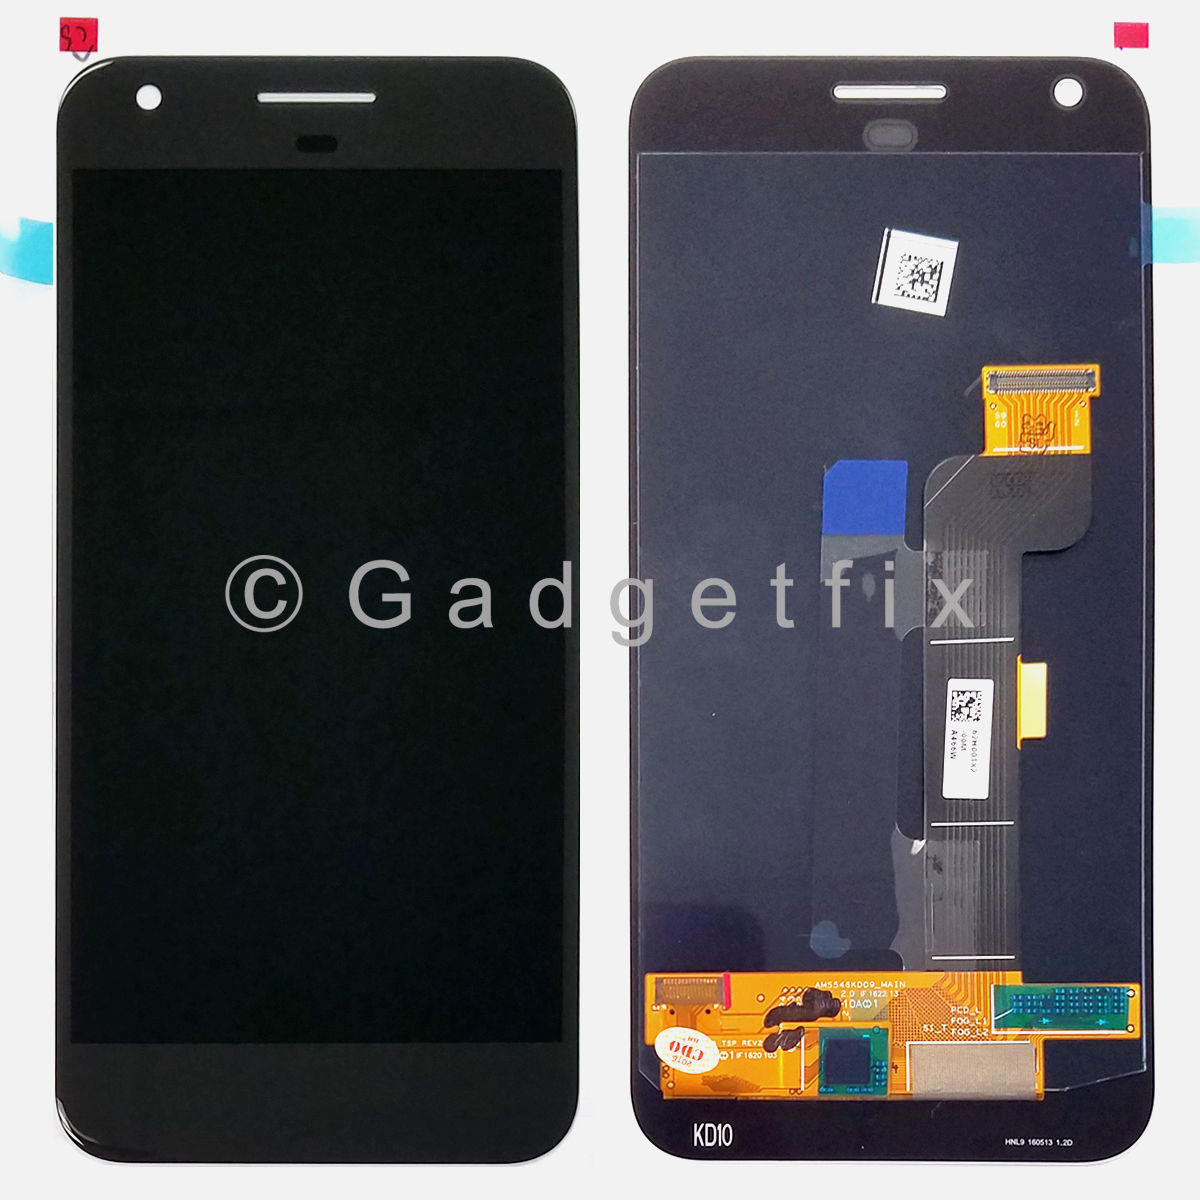 Google Pixel XL 5.5 Display LCD Touch Screen Digitizer Assembly